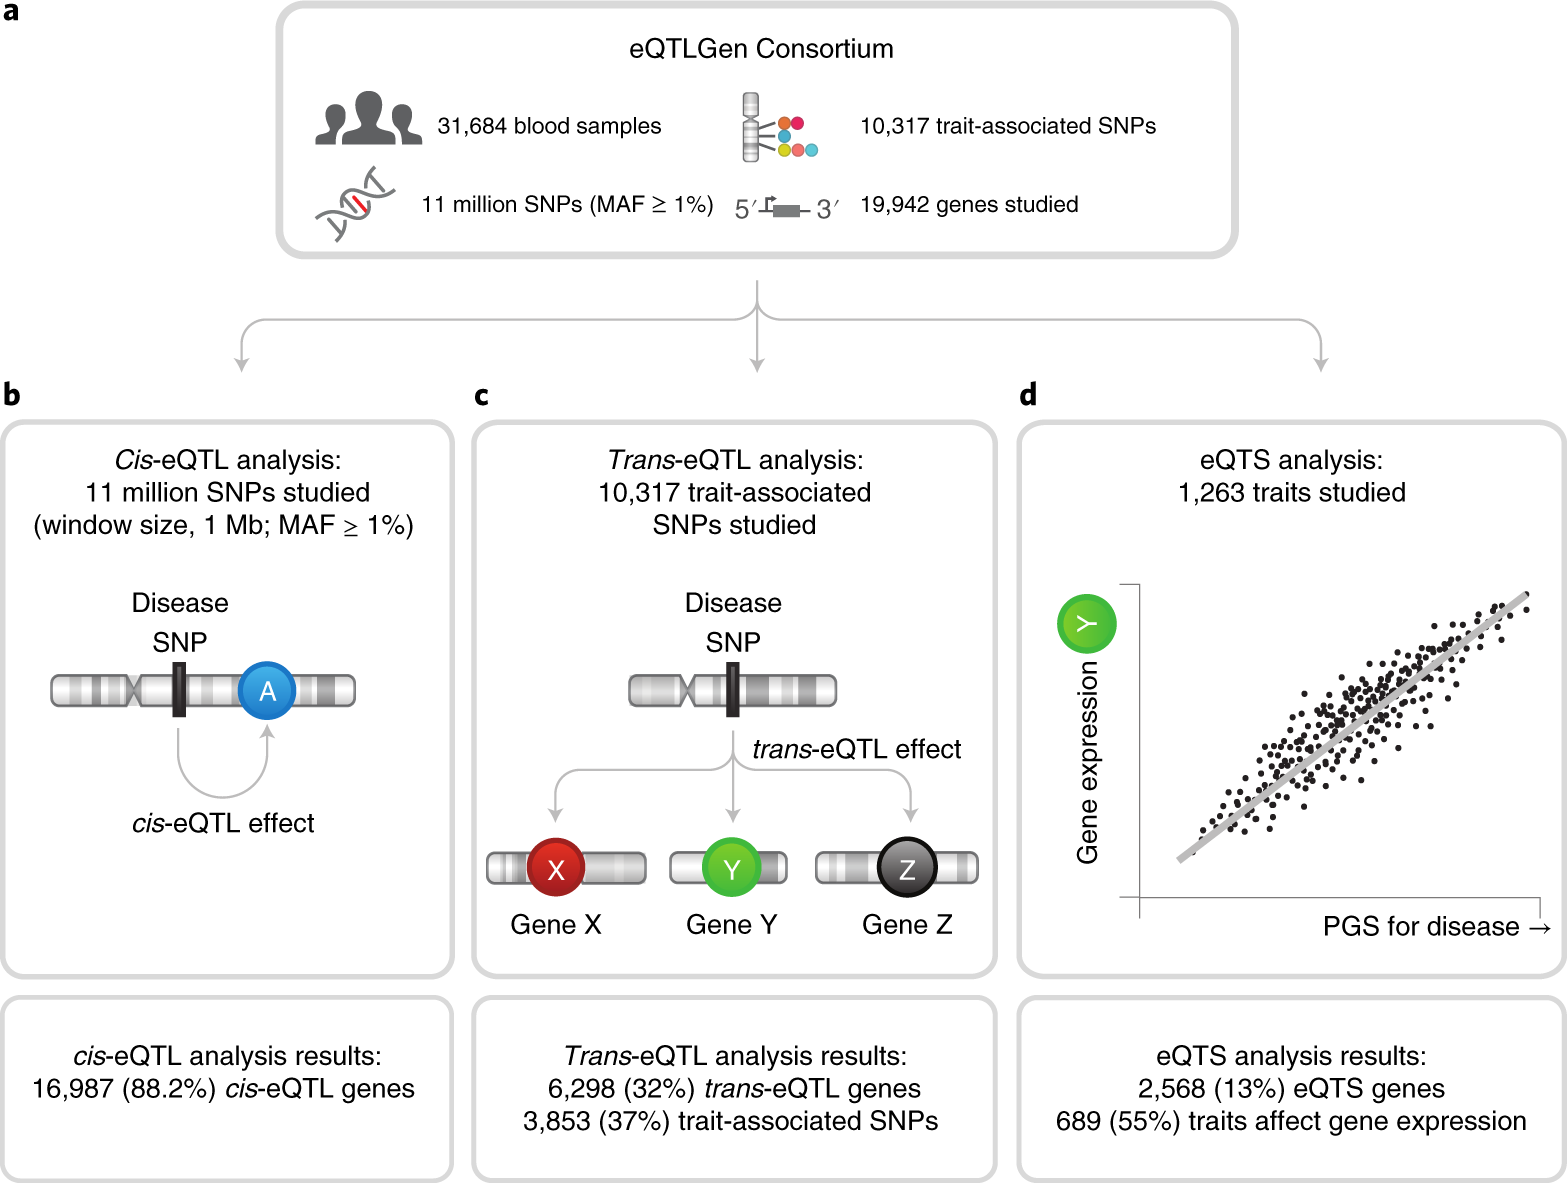 Large-scale cis- and trans-eQTL analyses identify thousands of genetic loci  and polygenic scores that regulate blood gene expression | Nature Genetics